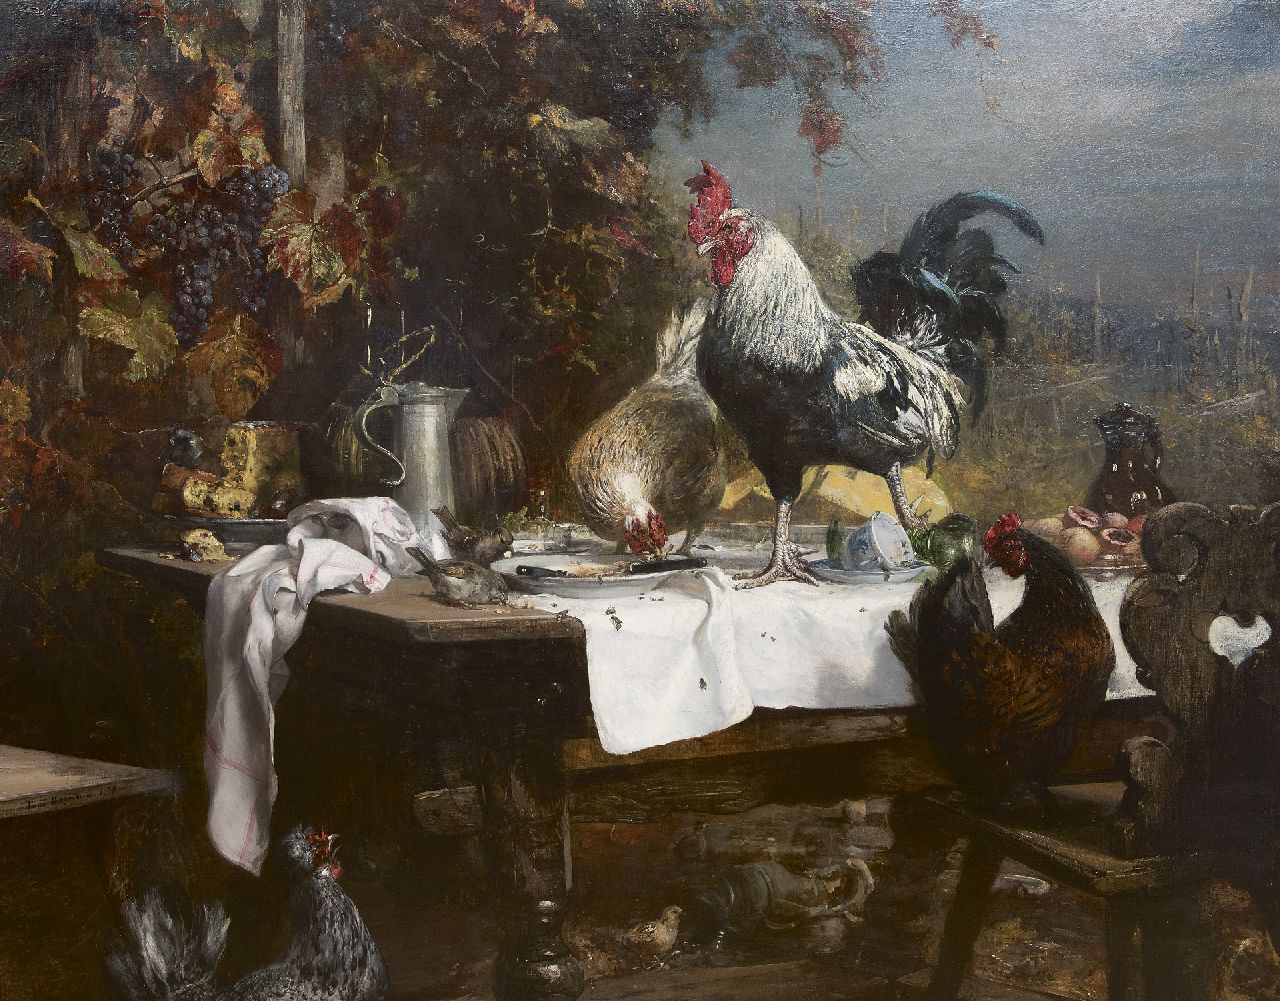 Meyerheim P.F.  | Paul Friedrich Meyerheim, The remains of the meal, oil on canvas 138.7 x 176.3 cm, signed l.l. and dated 1879